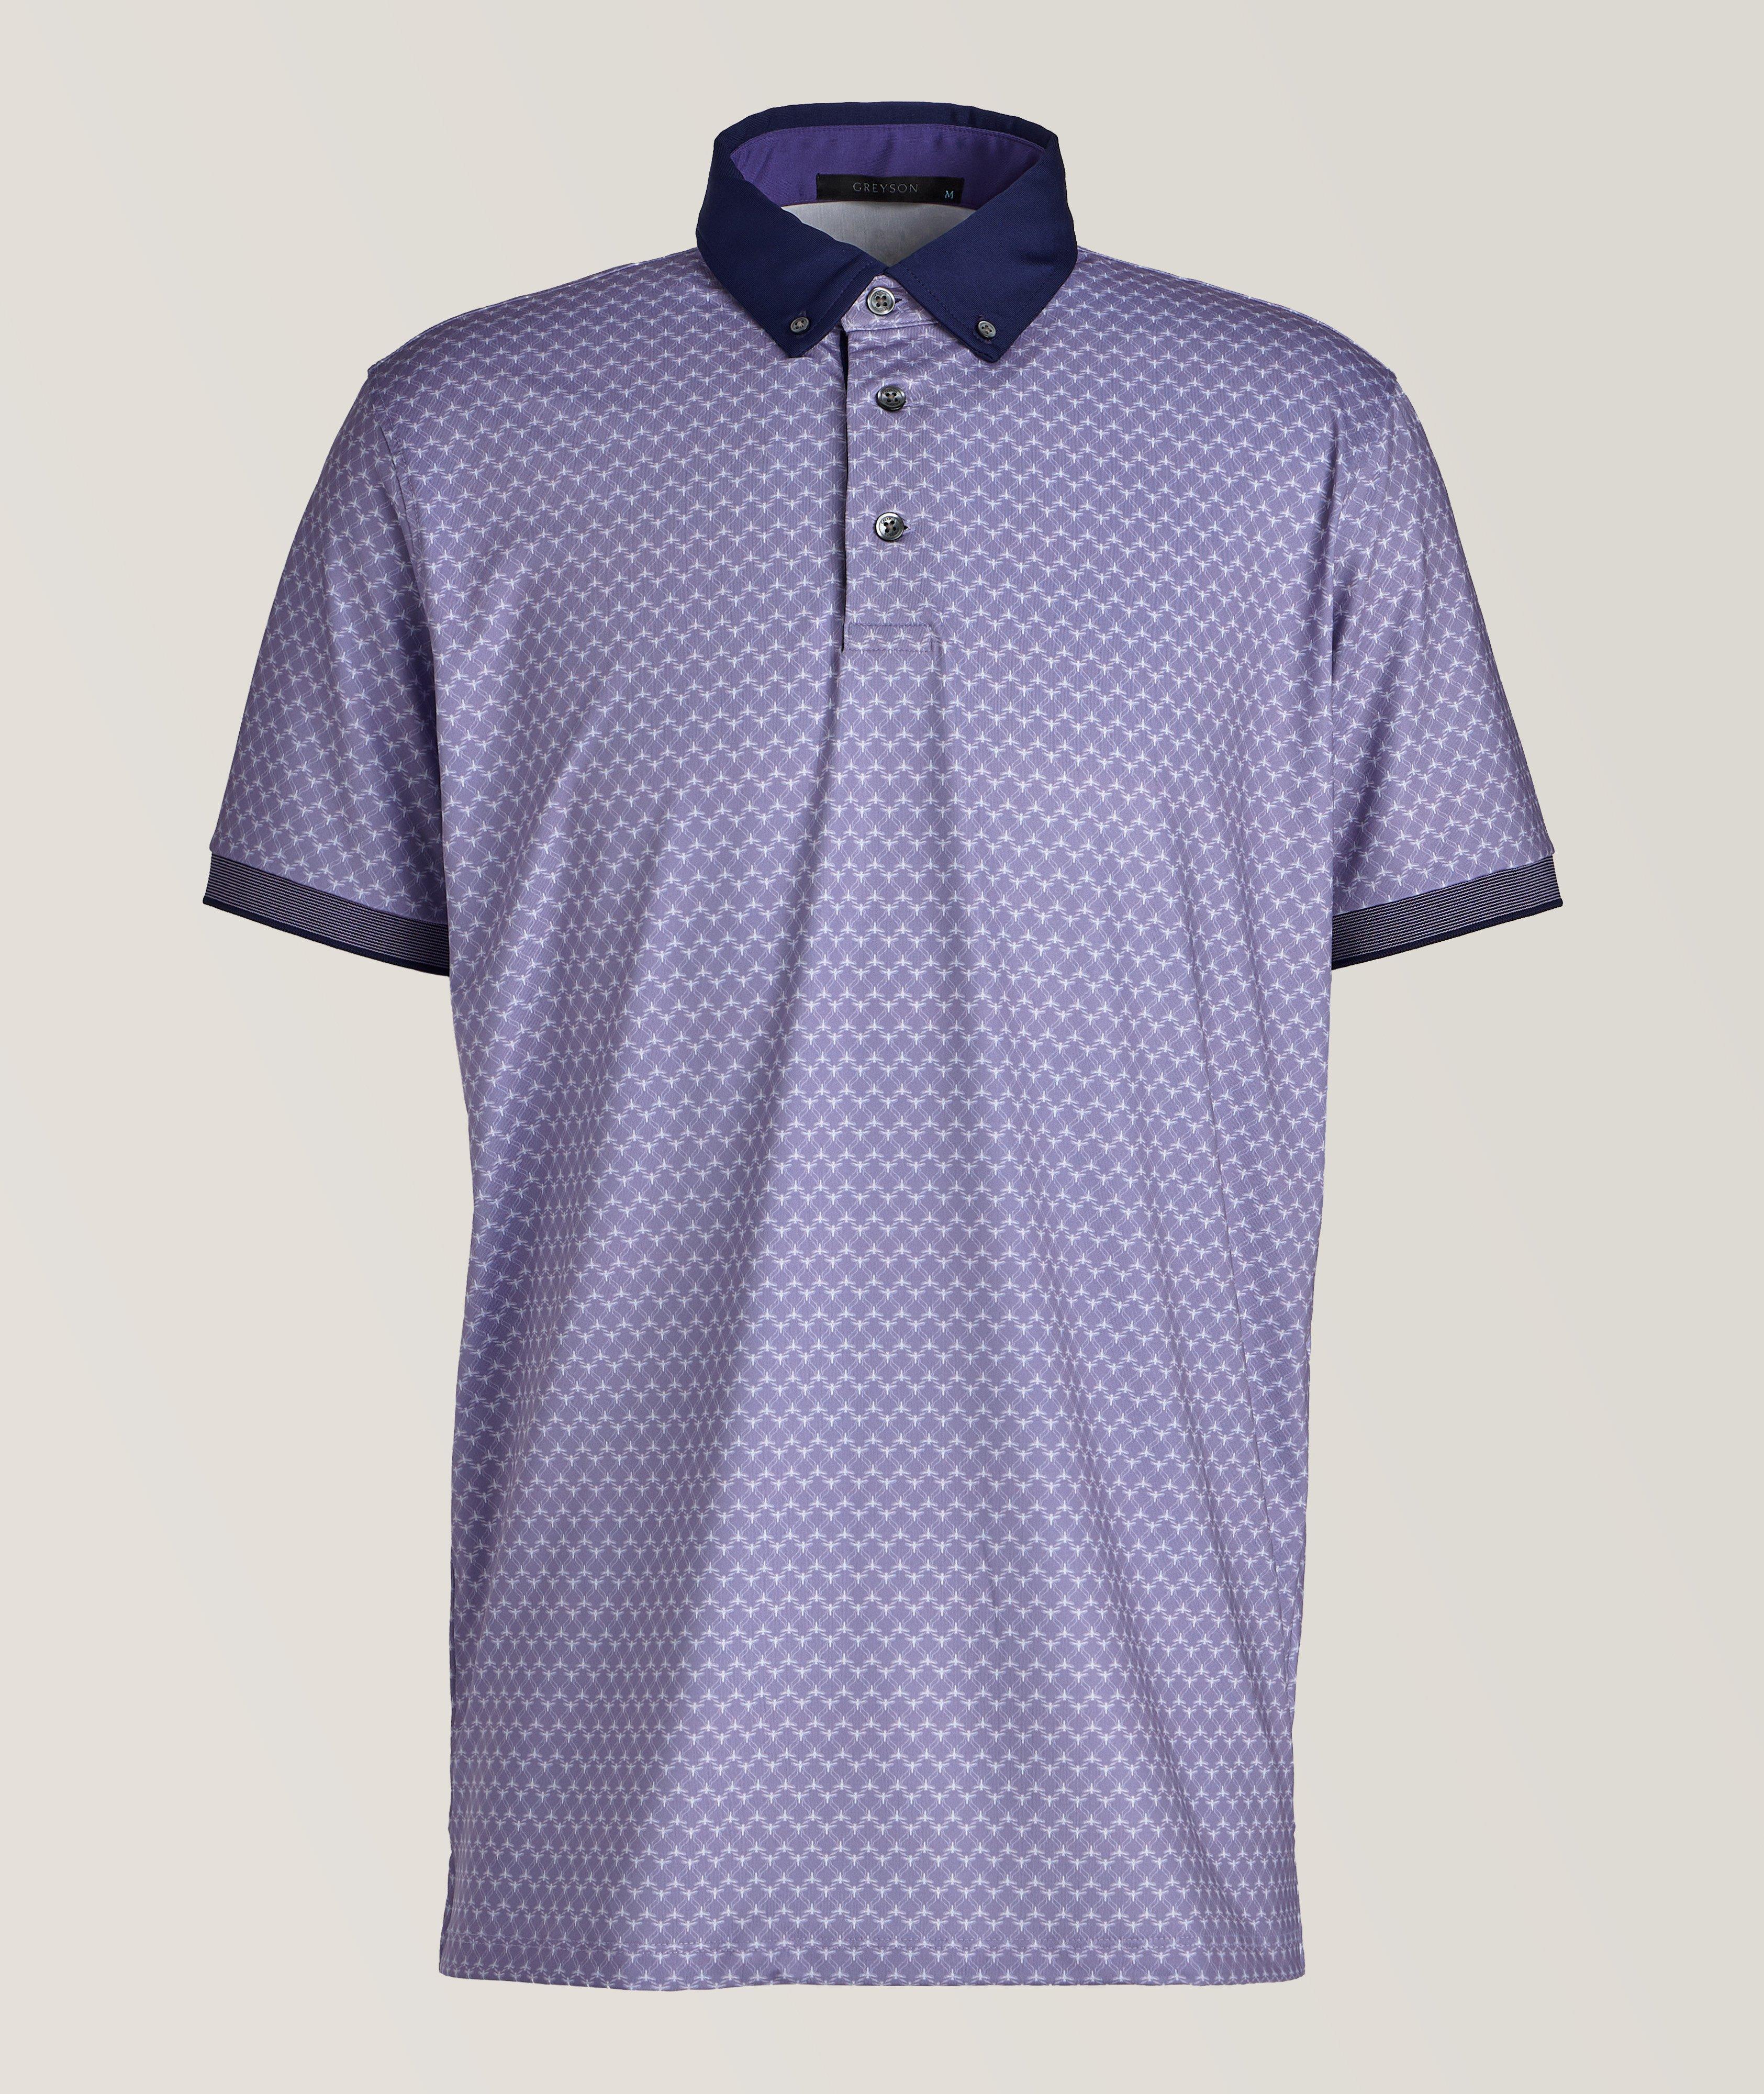 Greyson Players Club Mosquito Prophesies Golf Polo 